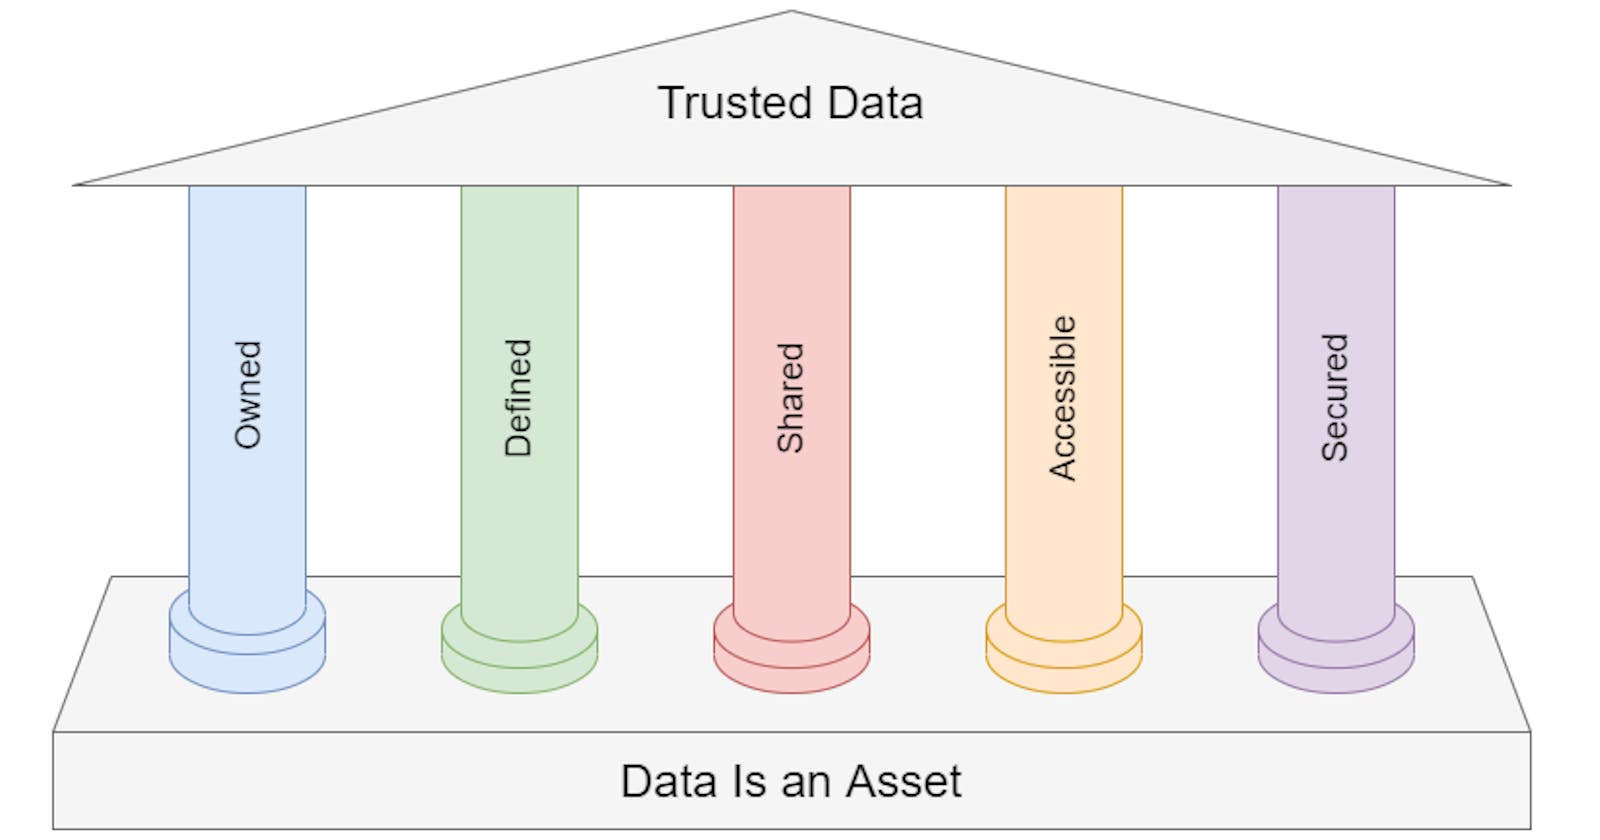 Creating Trusted Data